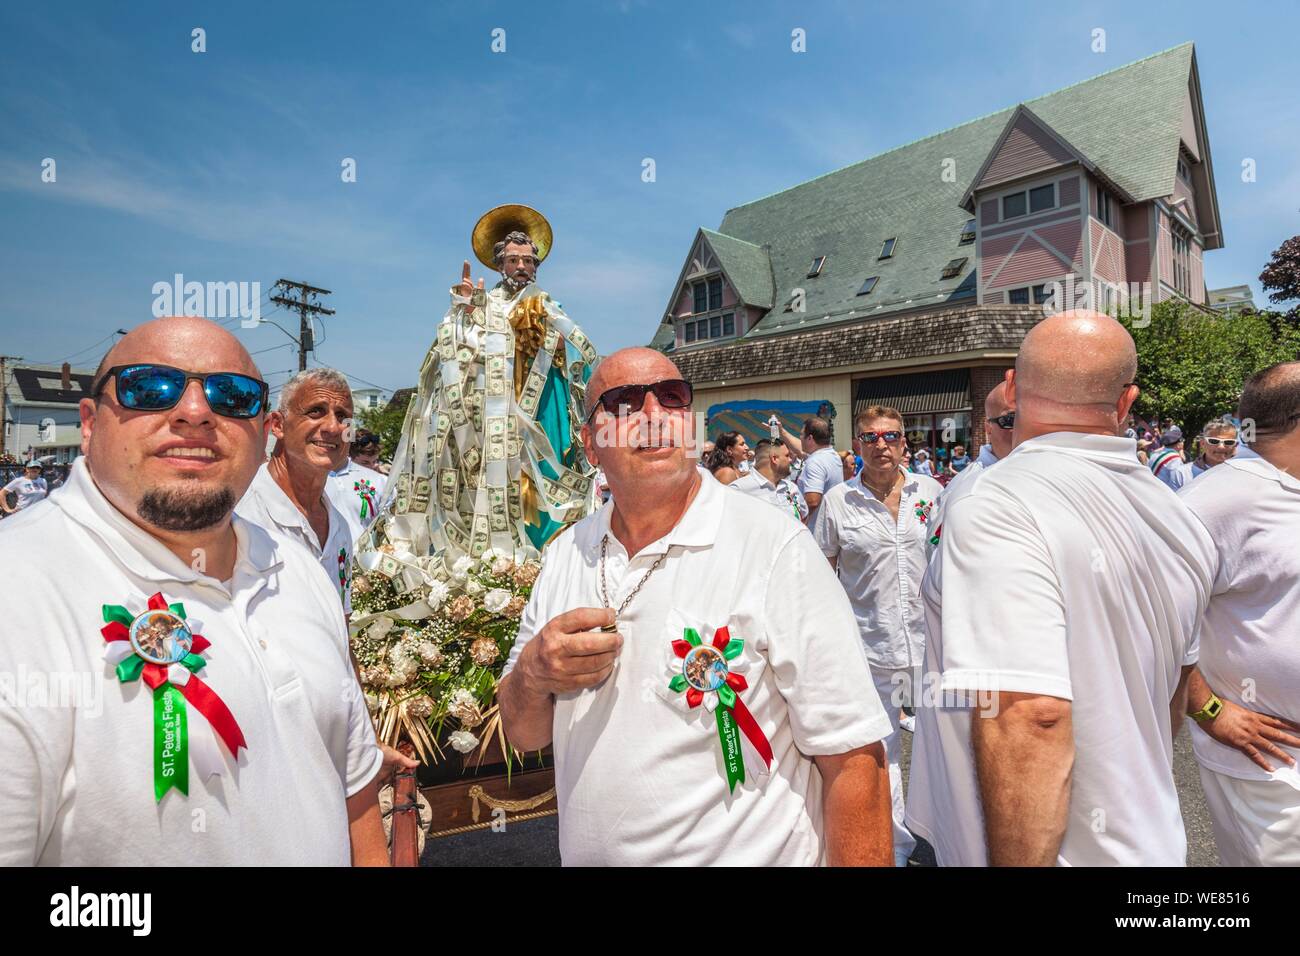 Saint peter’s fiesta gloucester hires stock photography and images Alamy